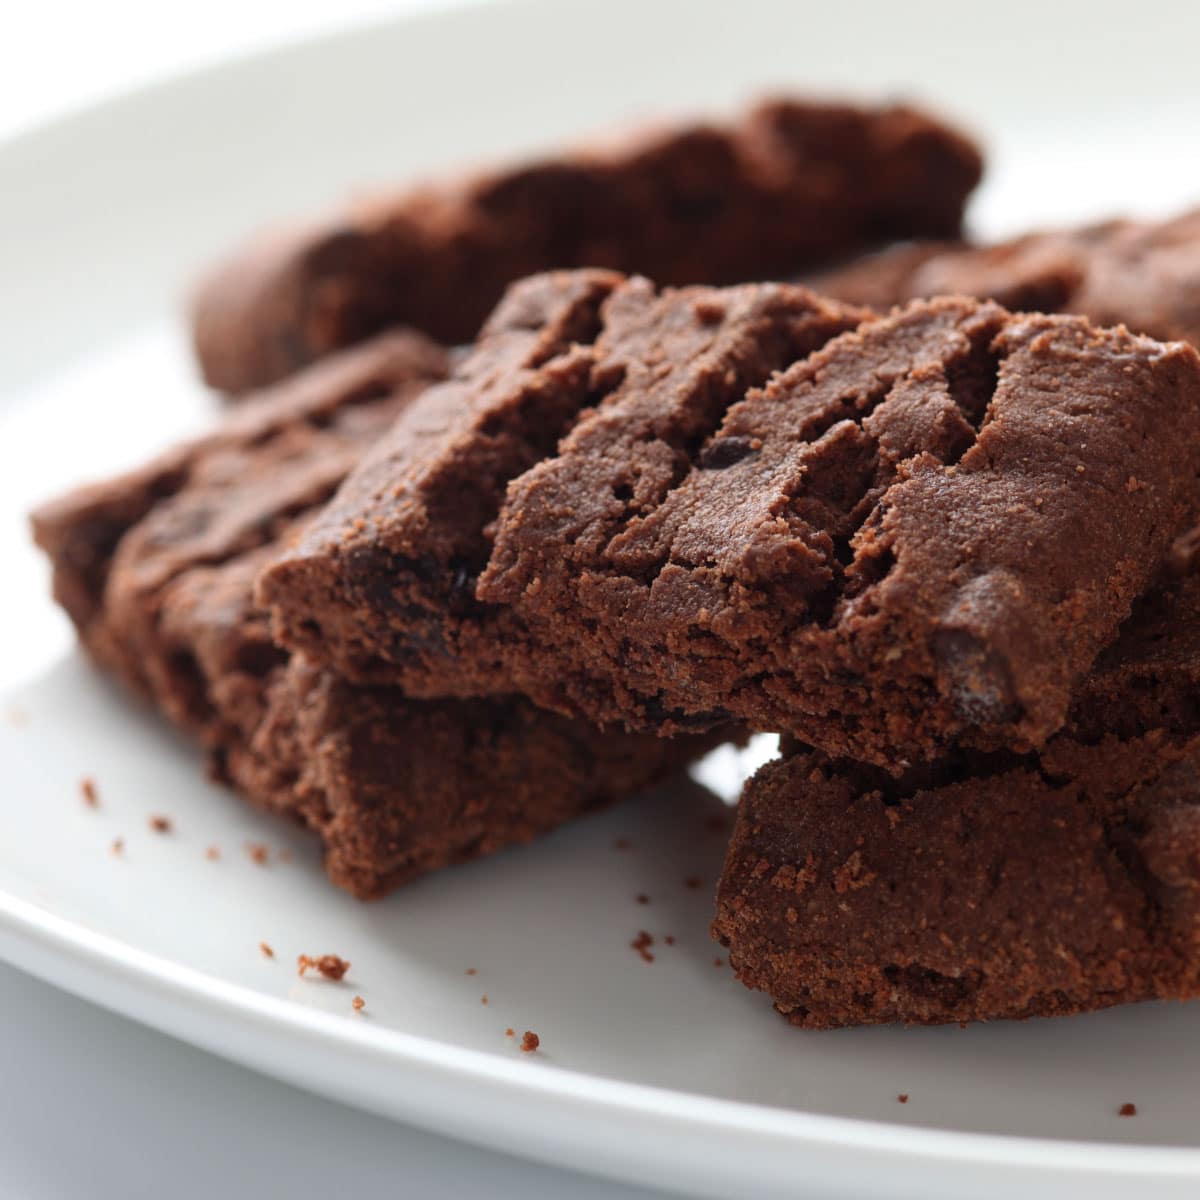 Discover how to make your brownies soft again with our expert baking tips. Revive your treats and enjoy the perfect brownie texture.